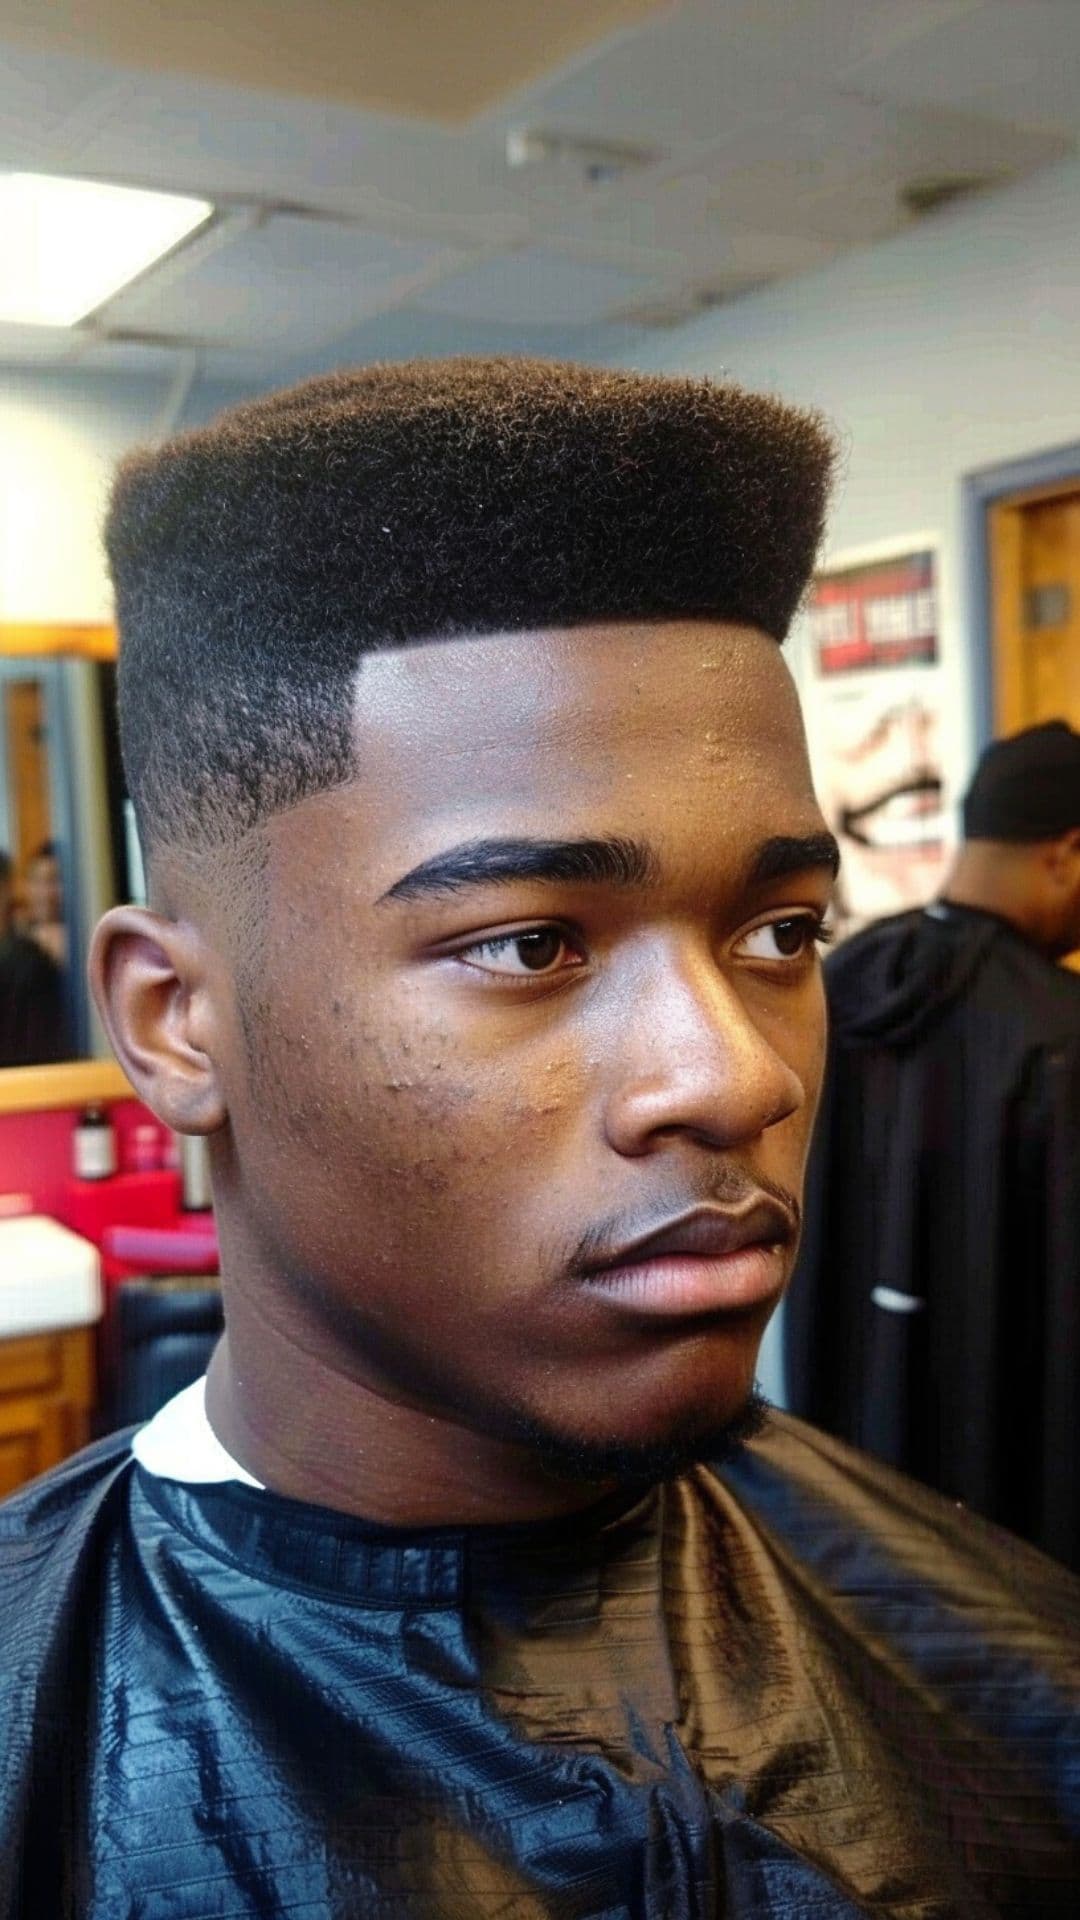 A black man modelling a box fade hairstyle.